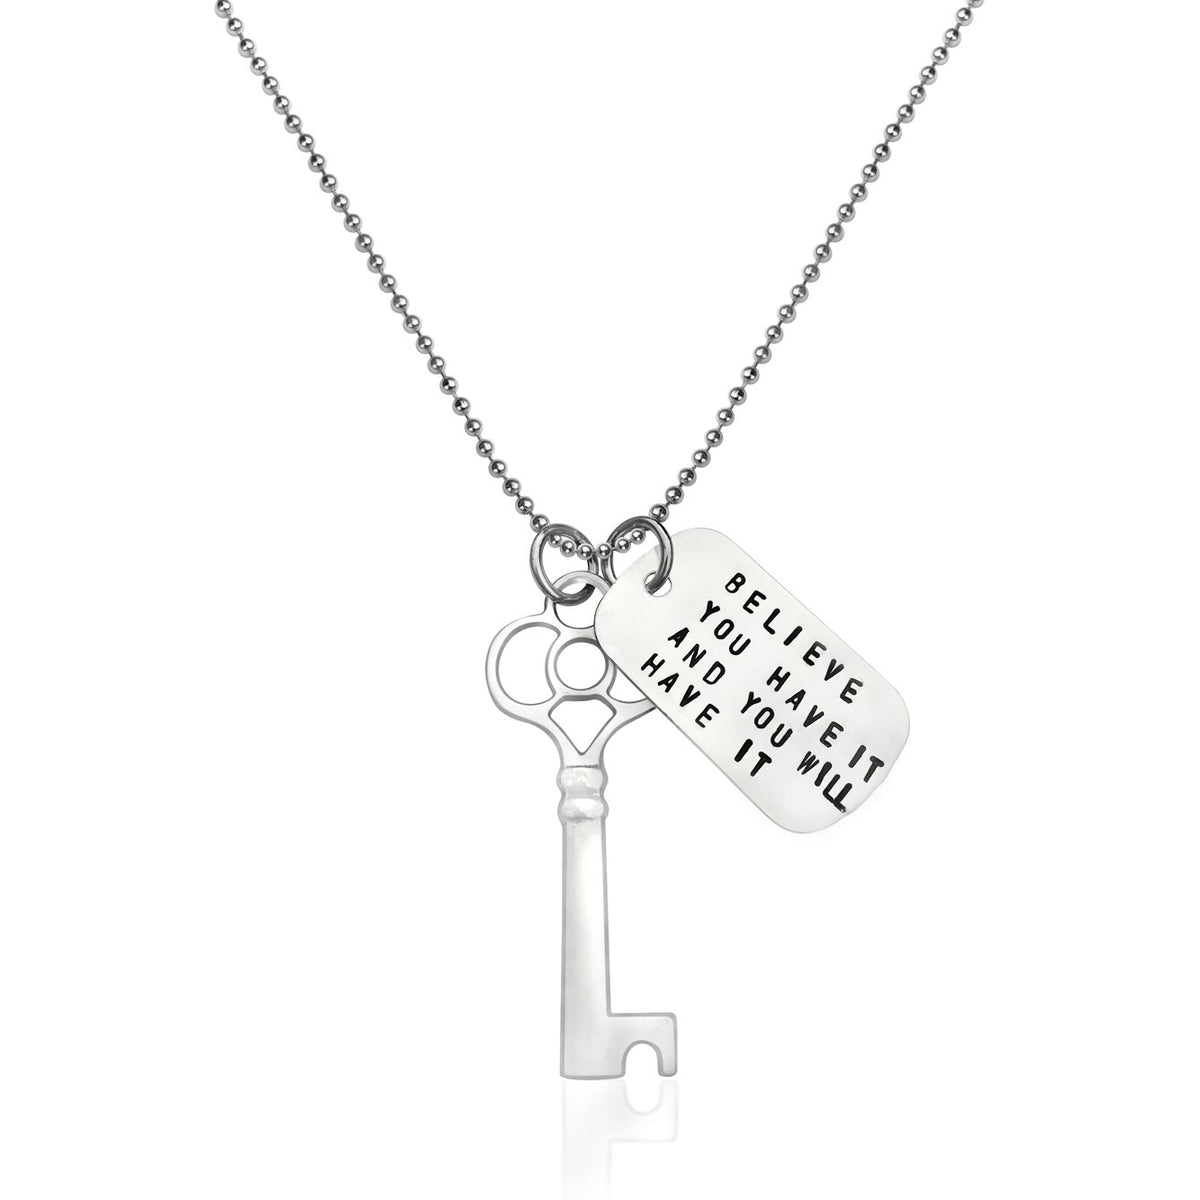 Key to Success Inspirational Sterling Silver Dog Tag Necklace Key